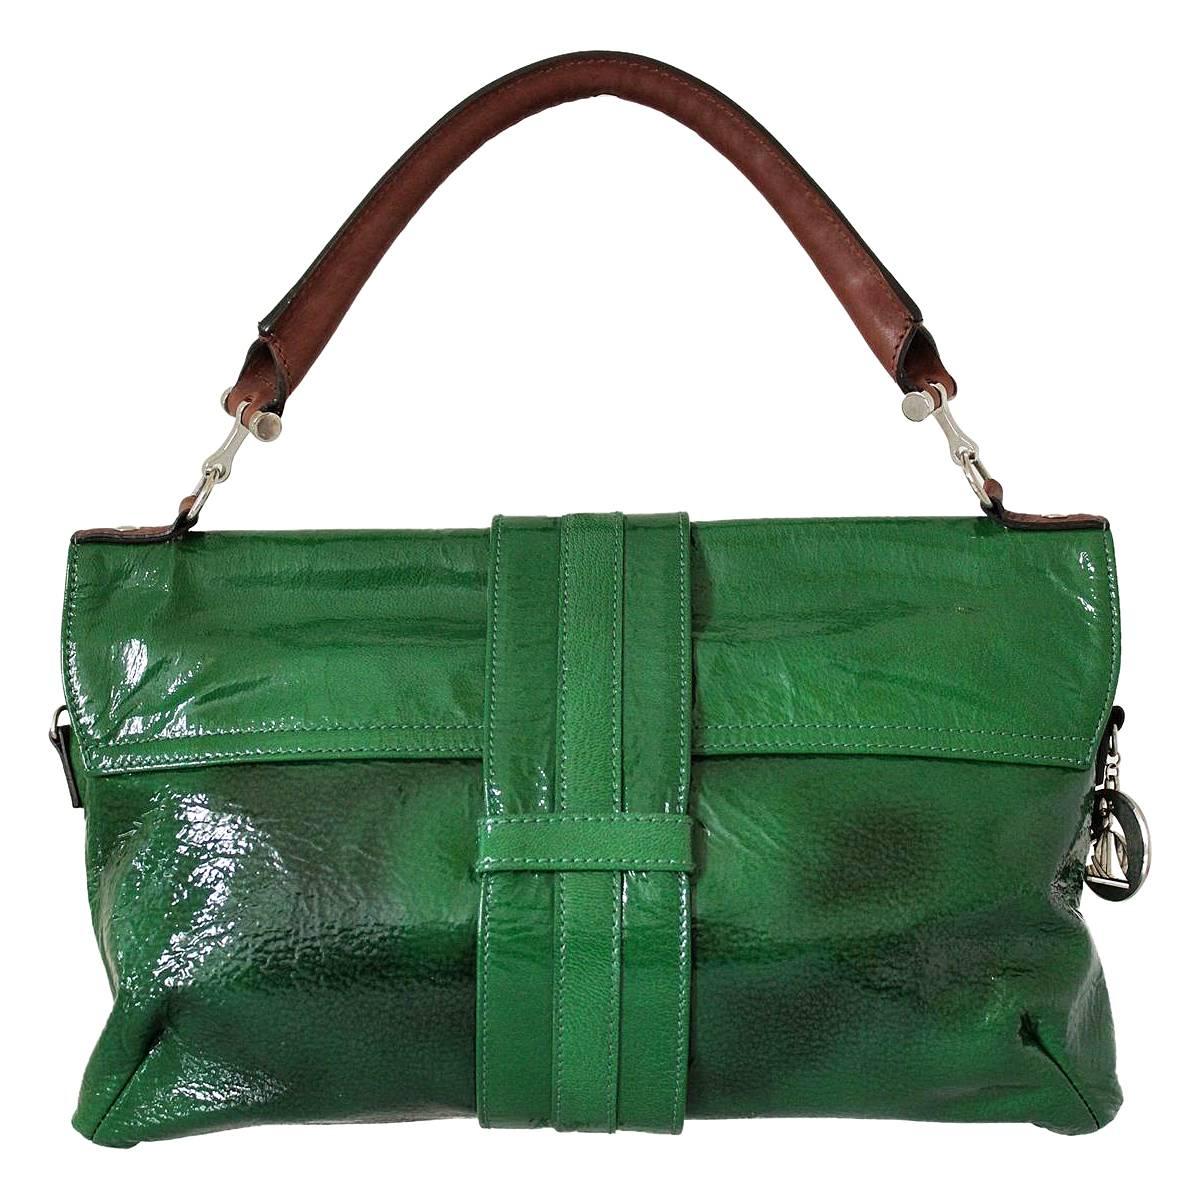 Beautiful and amazing color for this Lanvin handbag
Patent leather
Shaded green color
Brown leather handle
Two zip pocket
Cm 33 x 20 (12.9 x 7.8)
Made in Italy
Worldwide express shipping included in the price !